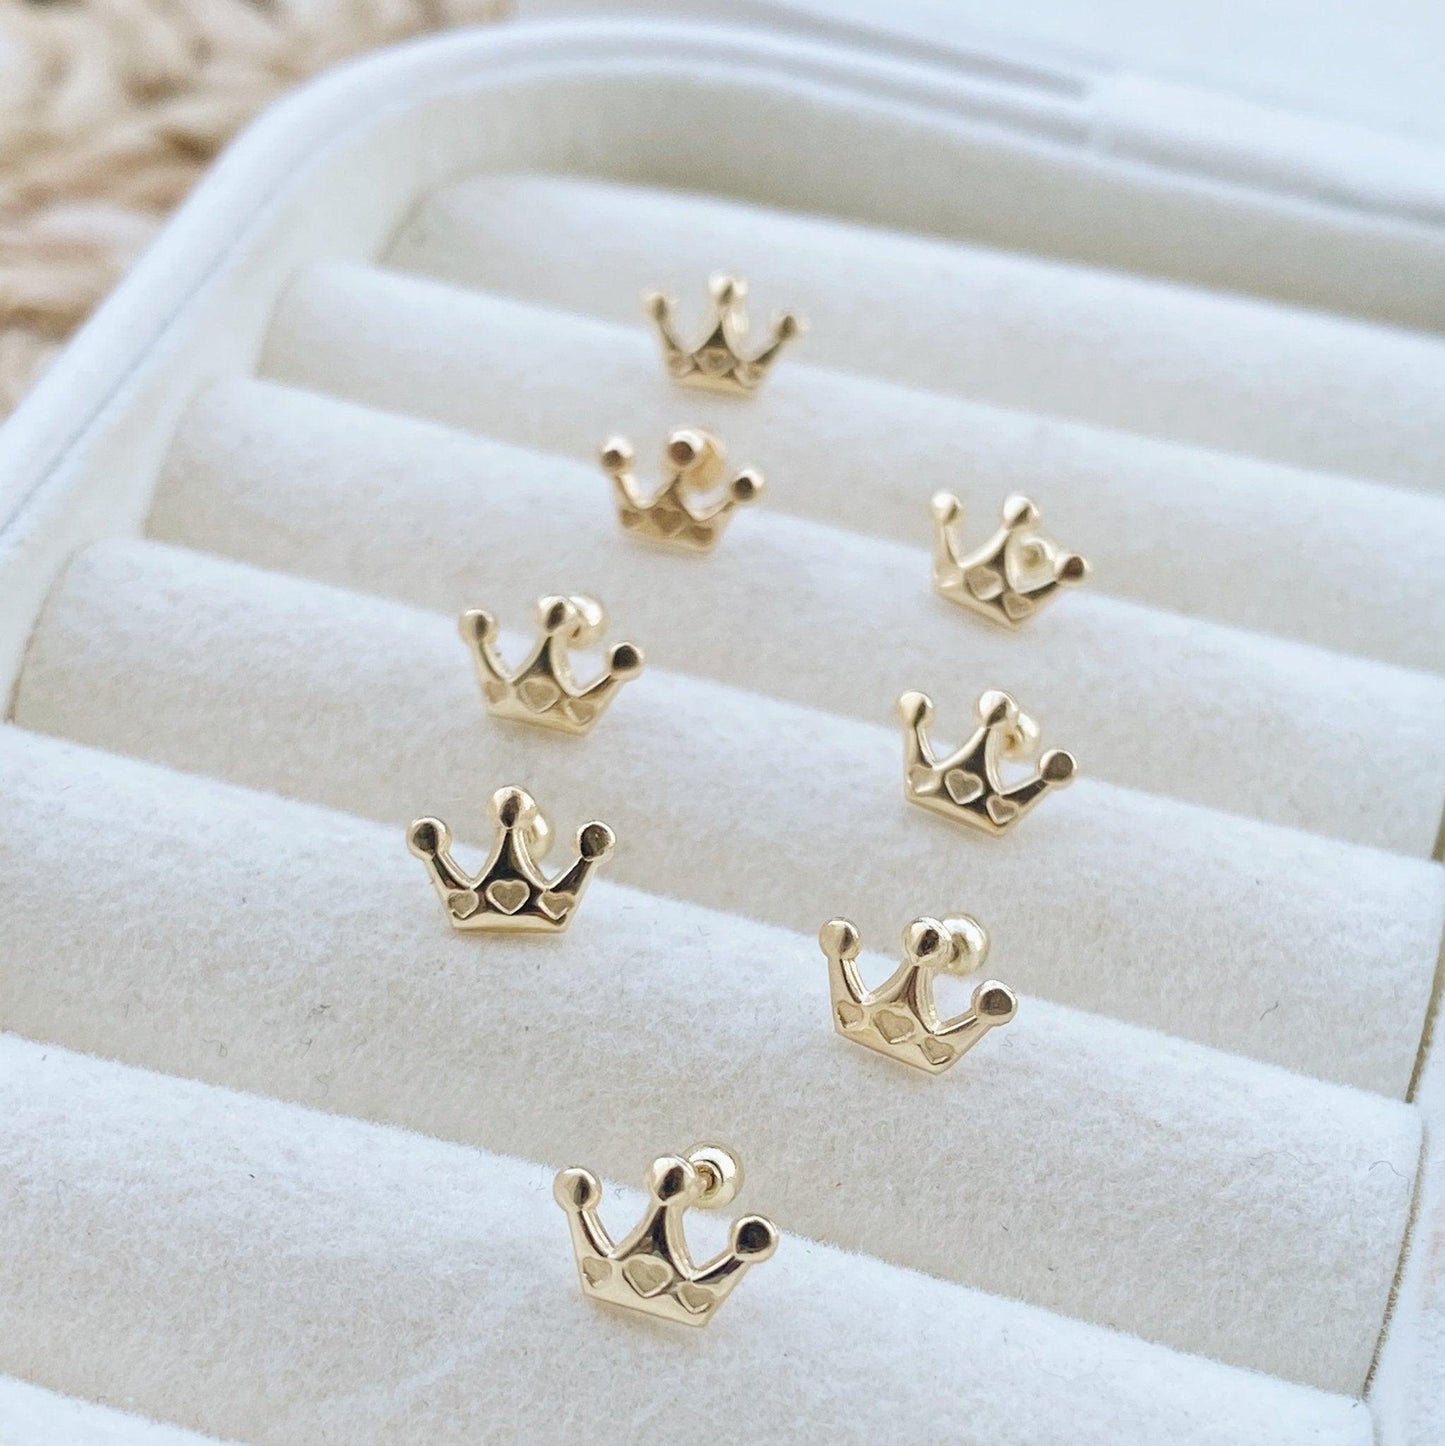 Load image into Gallery viewer, Are you a queen? Why not wear crowns everyday with our new collection of Crown stud earrings. These gold crown stud earrings are perfect to show your regal spirit wherever you go.
